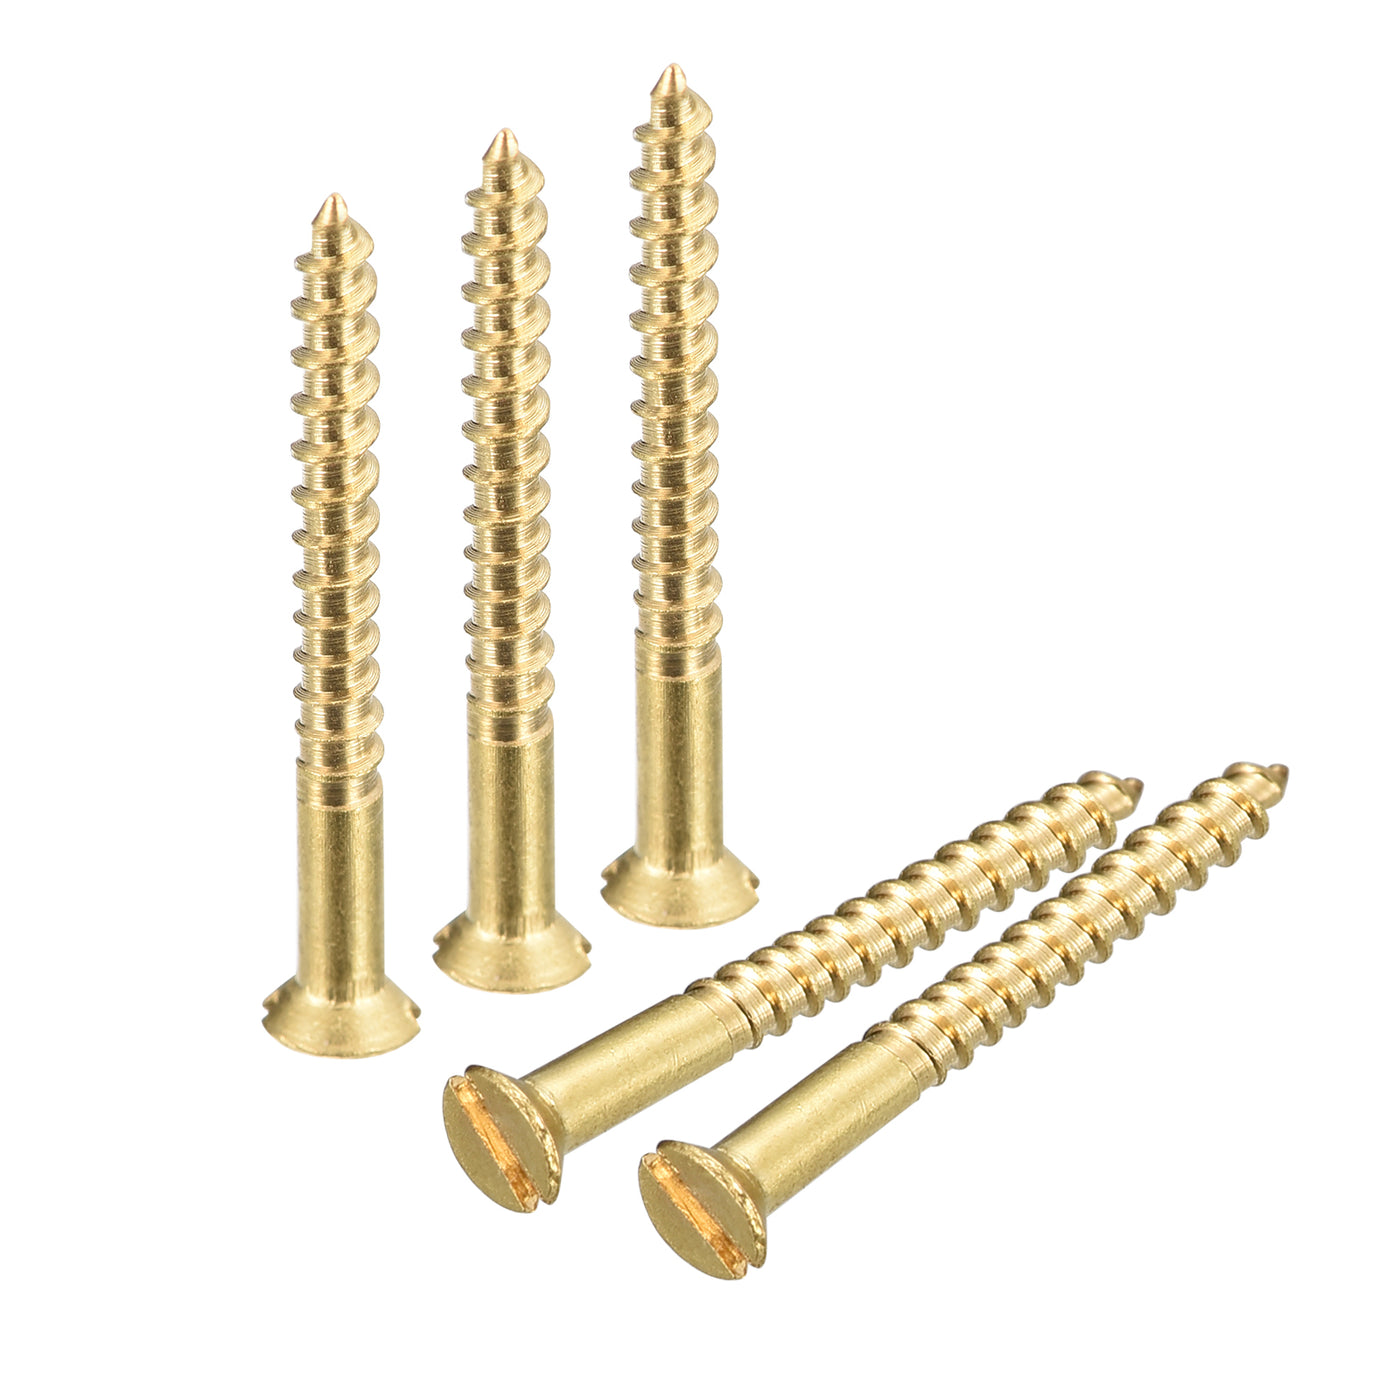 uxcell Uxcell 100Pcs M2 x 20mm Brass Slotted Drive Flat Head Wood Screws Self Tapping Screw